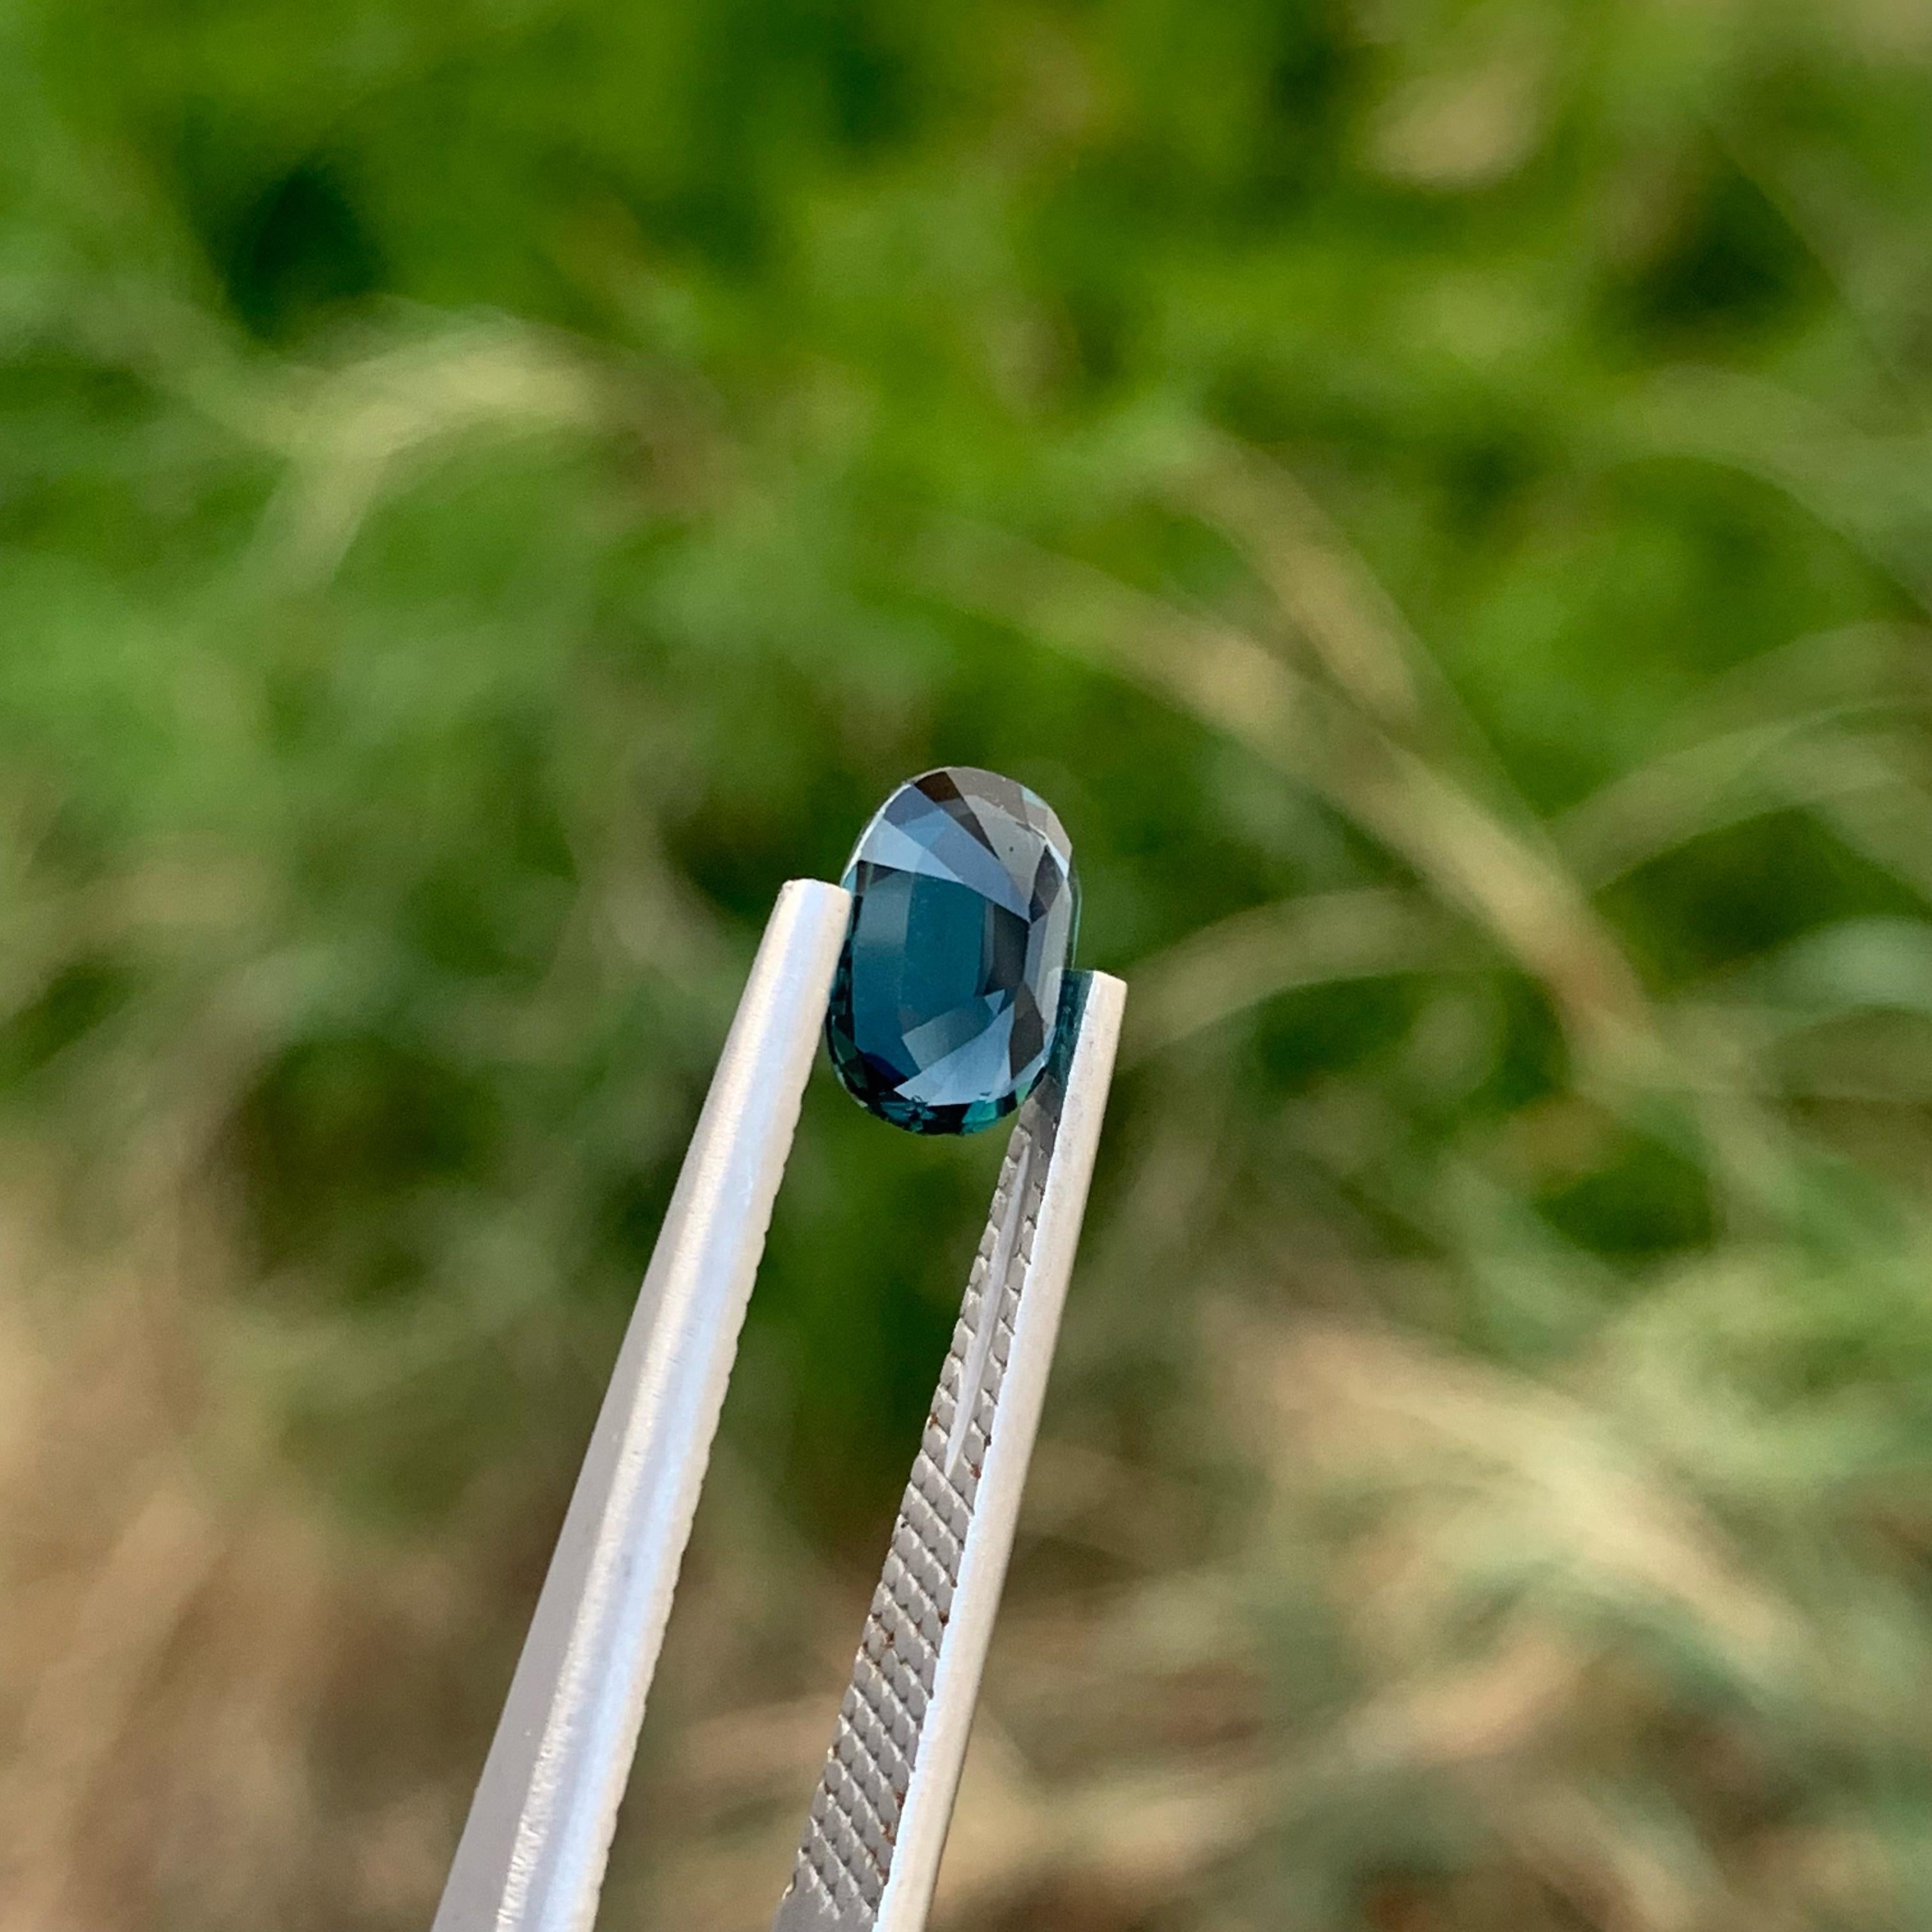 Weight 1.60 carats 
Dimensions 7.9 x 6.4 x 3.7 mm
Treatment Heated 
Origin Sri Lanka 
Clarity VVS (Very, Very Slightly Included)
Shape Oval 
Cut Fancy Oval 



Discover the allure of a Sea-Blue Sapphire, a natural gemstone from the vibrant